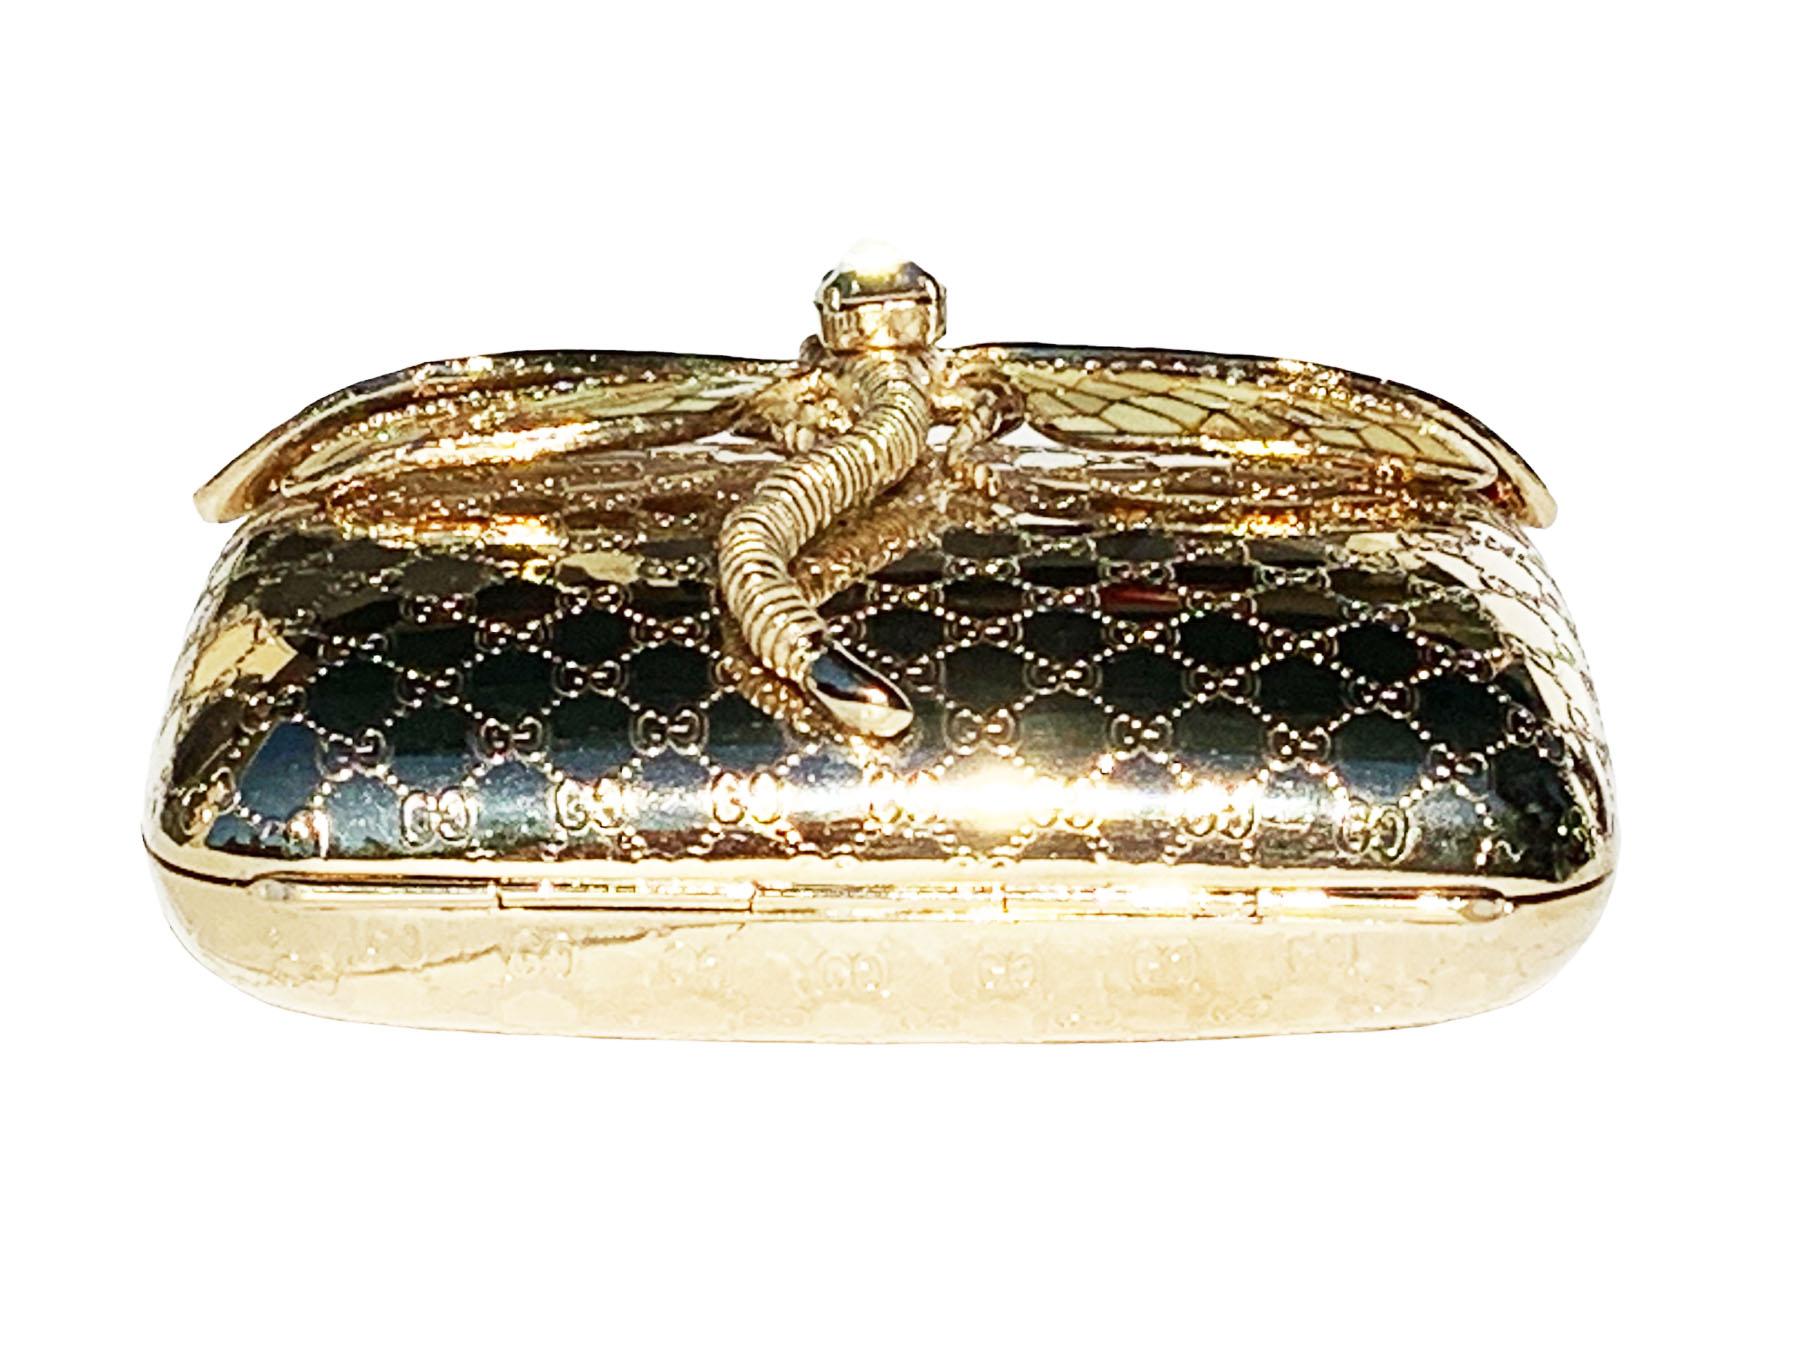 Tom Ford for Gucci Dragonfly Gold Metal MicroGuccissima Enamel Minaudiere Clutch For Sale 3